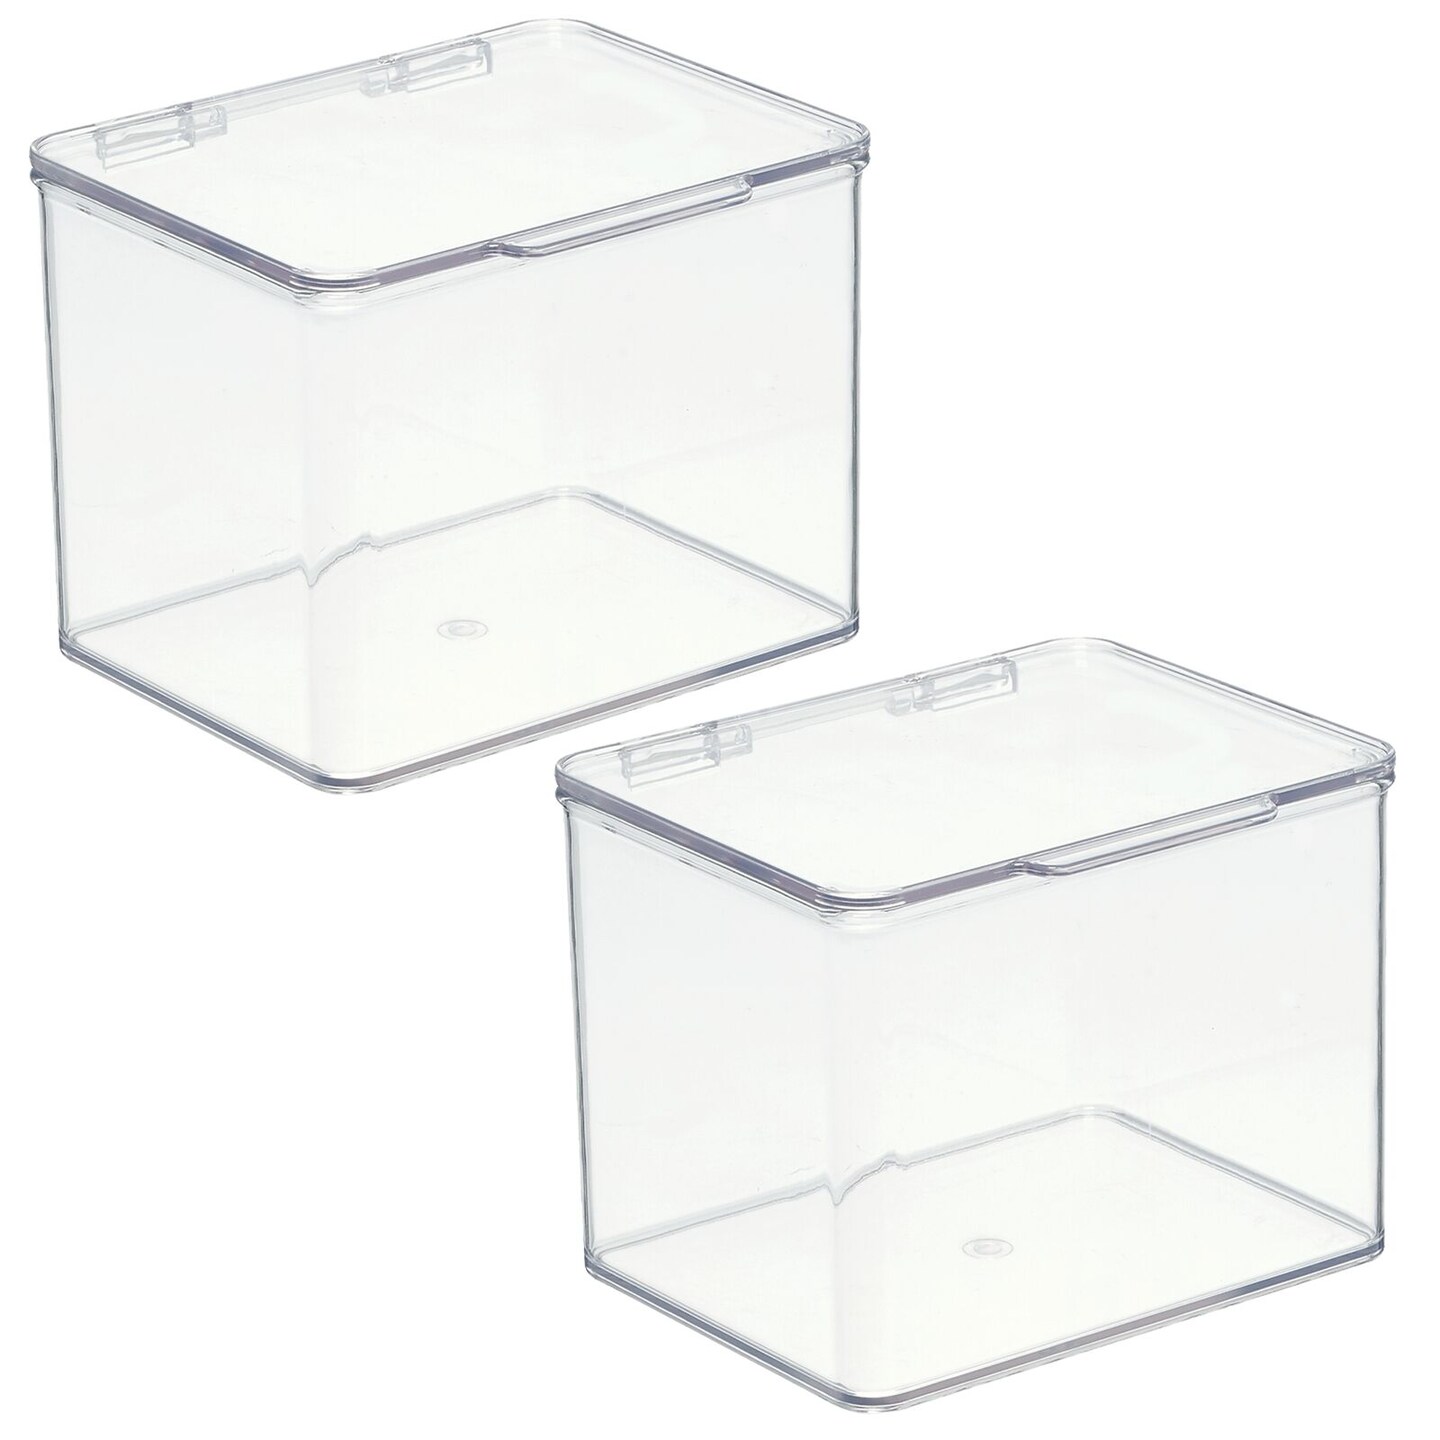 mDesign Stackable Plastic Bathroom Organizer Box with Lid, 2 Pack